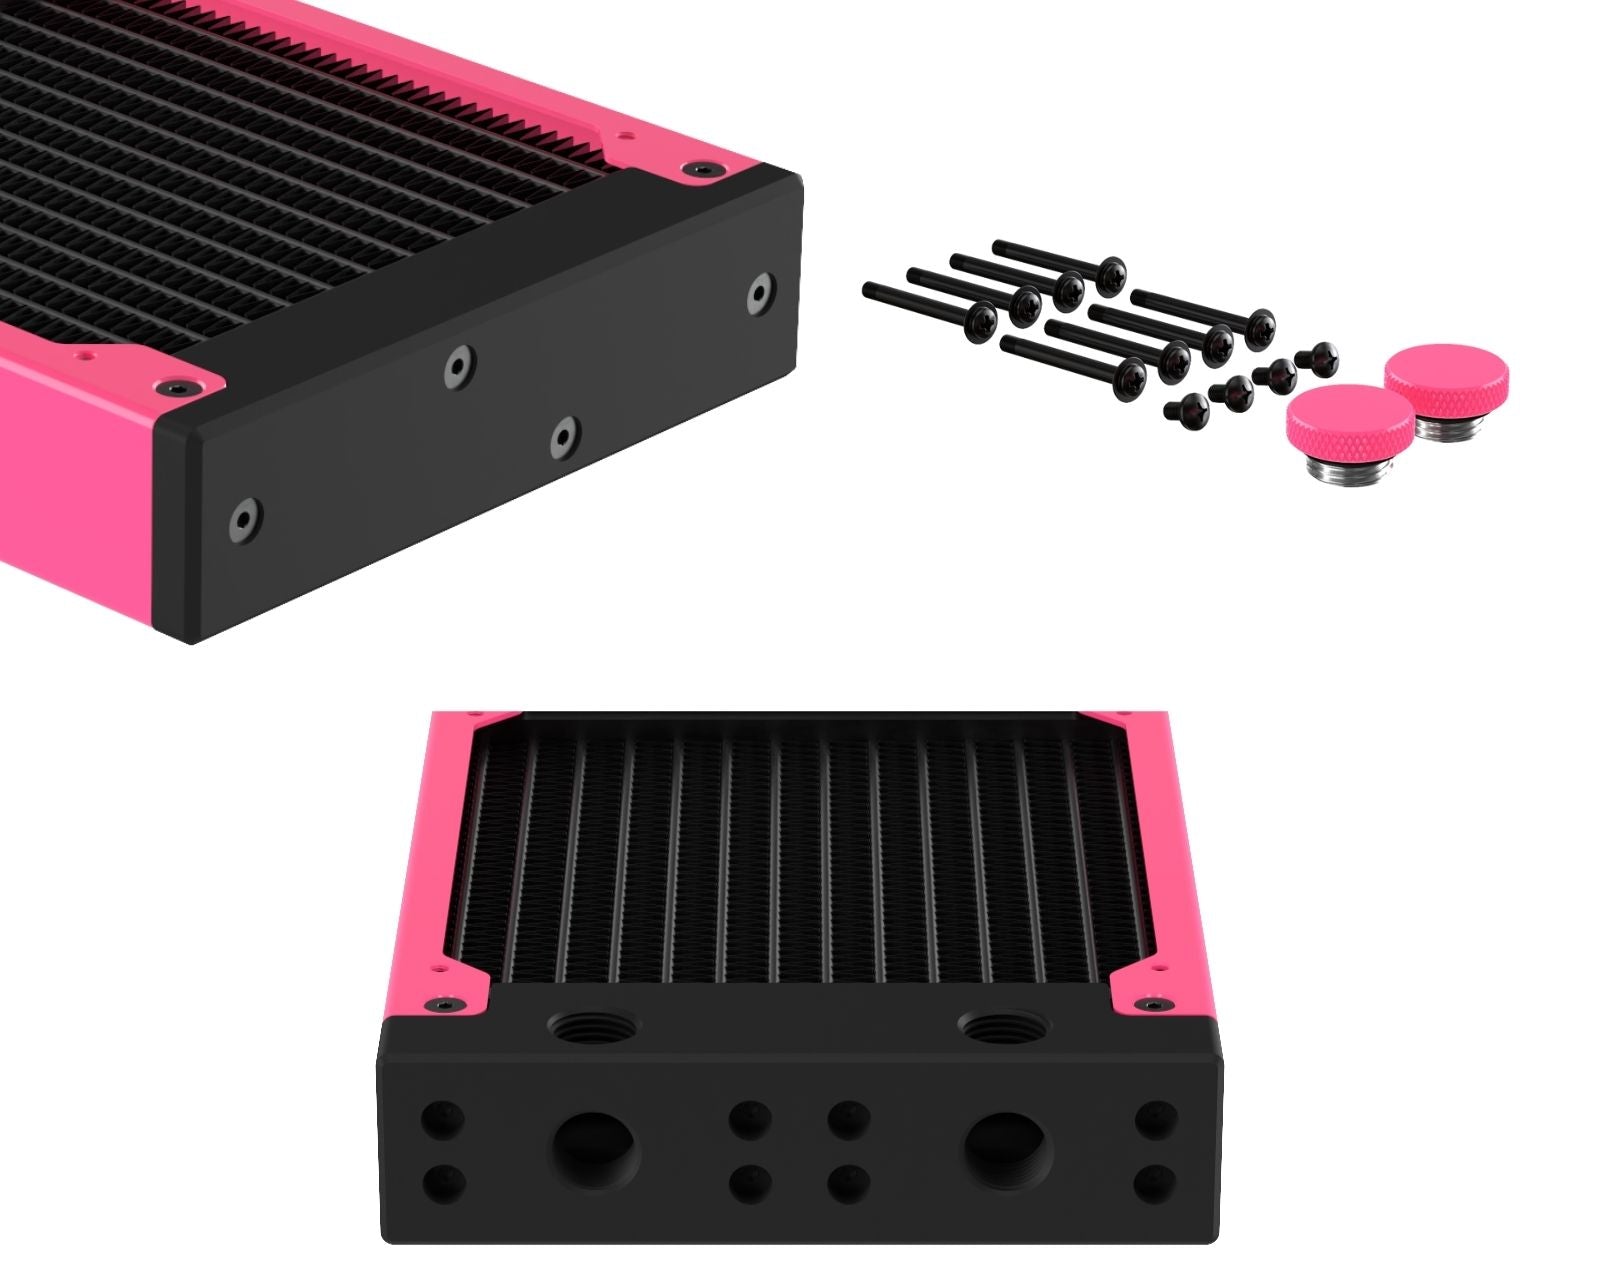 PrimoChill 240SL (30mm) EXIMO Modular Radiator, Black POM, 2x120mm, Dual Fan (R-SL-BK24) Available in 20+ Colors, Assembled in USA and Custom Watercooling Loop Ready - UV Pink